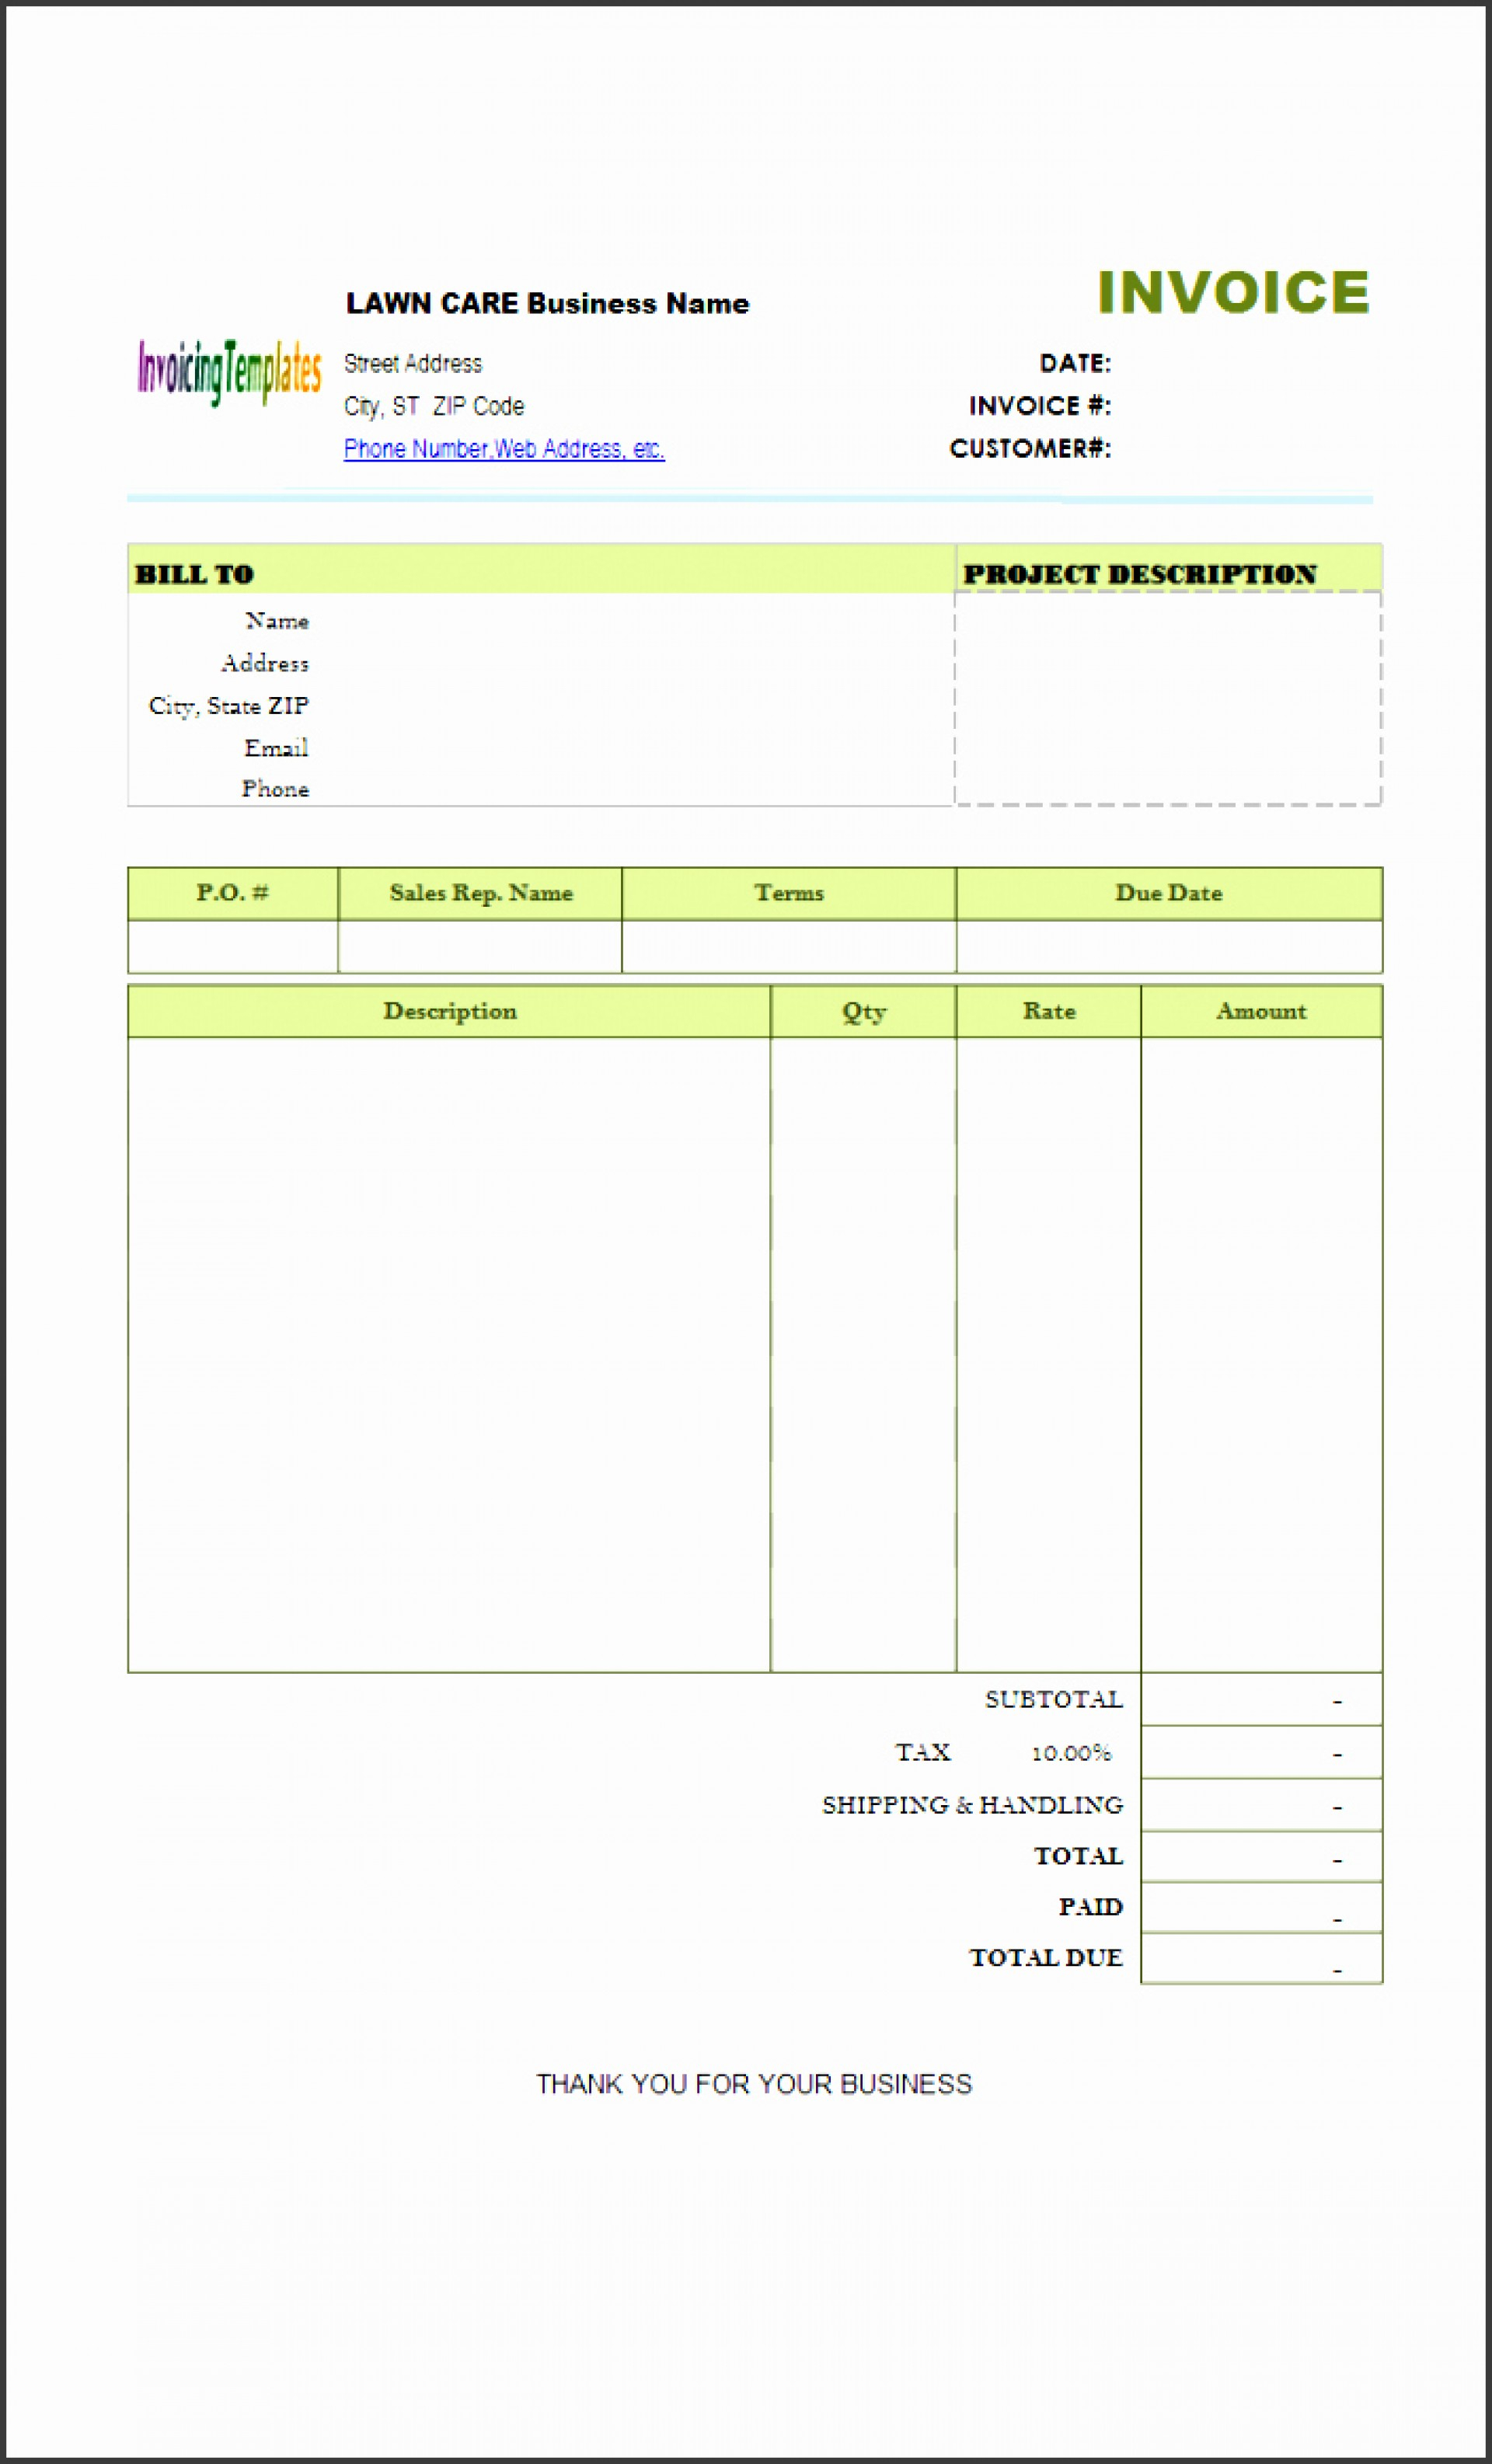 Service Invoice Template Word Lawn Care Or Printable in Lawn Care Invoice Template Word